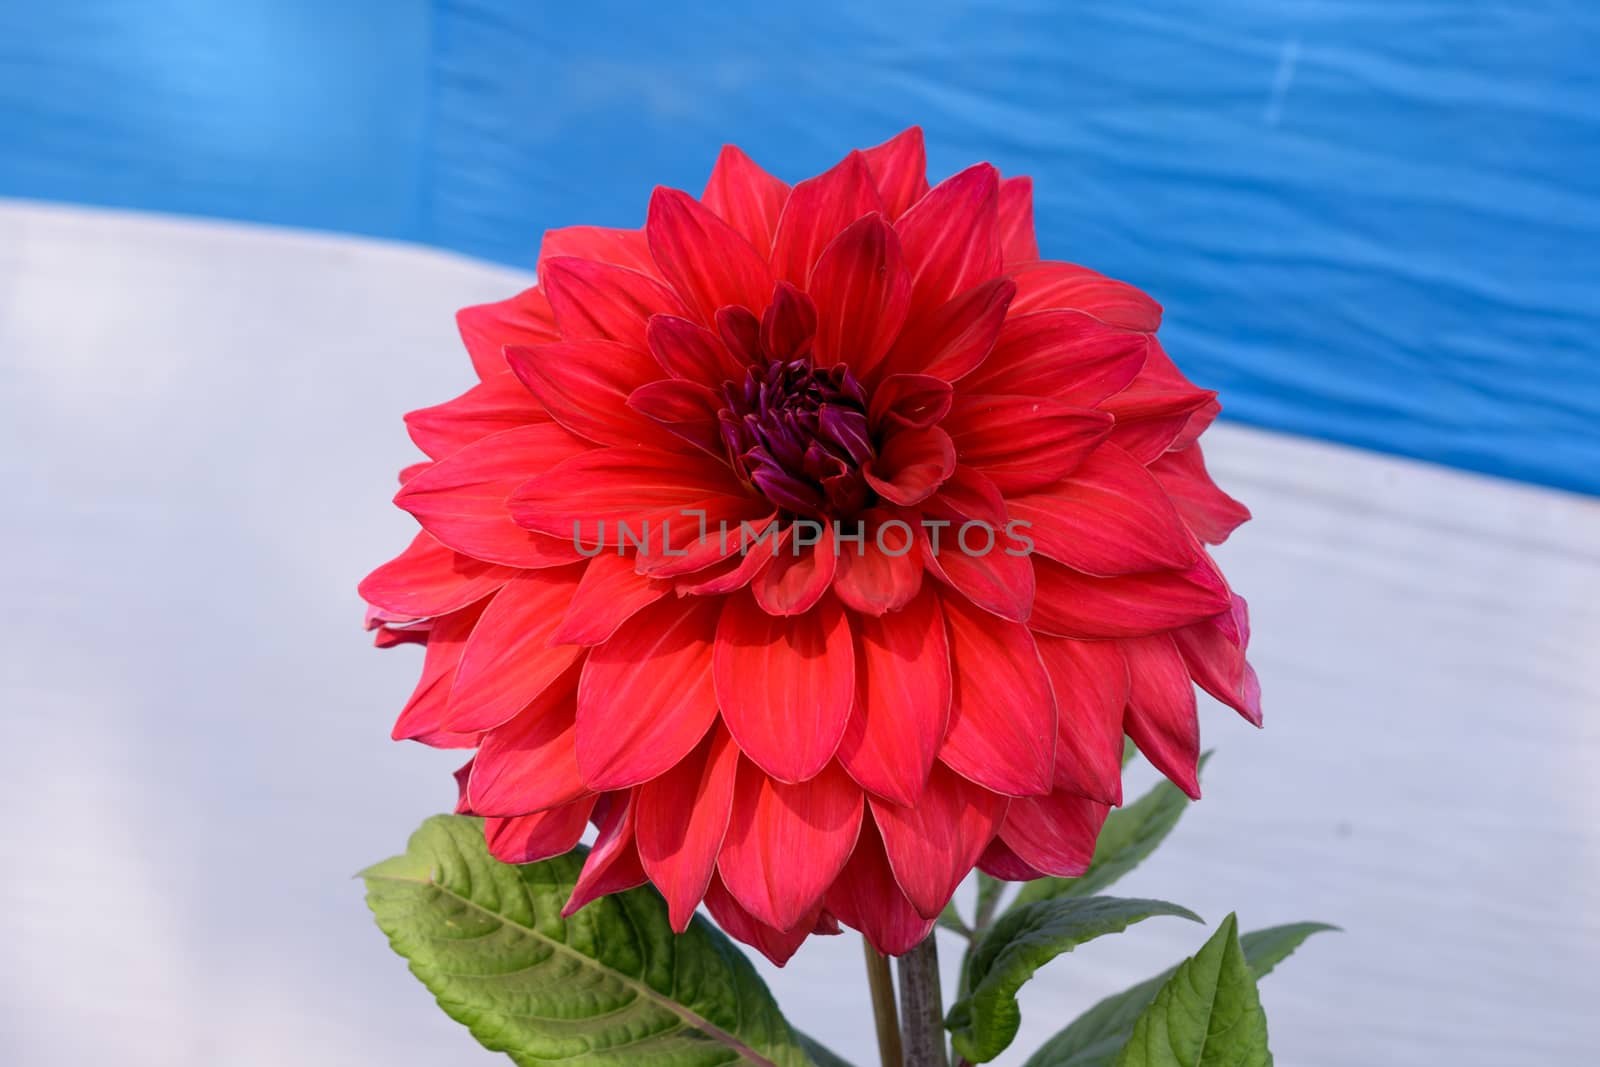 Multi layer petals Red Aster. Aster is a genus of perennial in the family Asteraceae. A sun loving plant Blooms in winter spring and summer. Popular flower for bouquets, symbol of love or friendship. by sudiptabhowmick